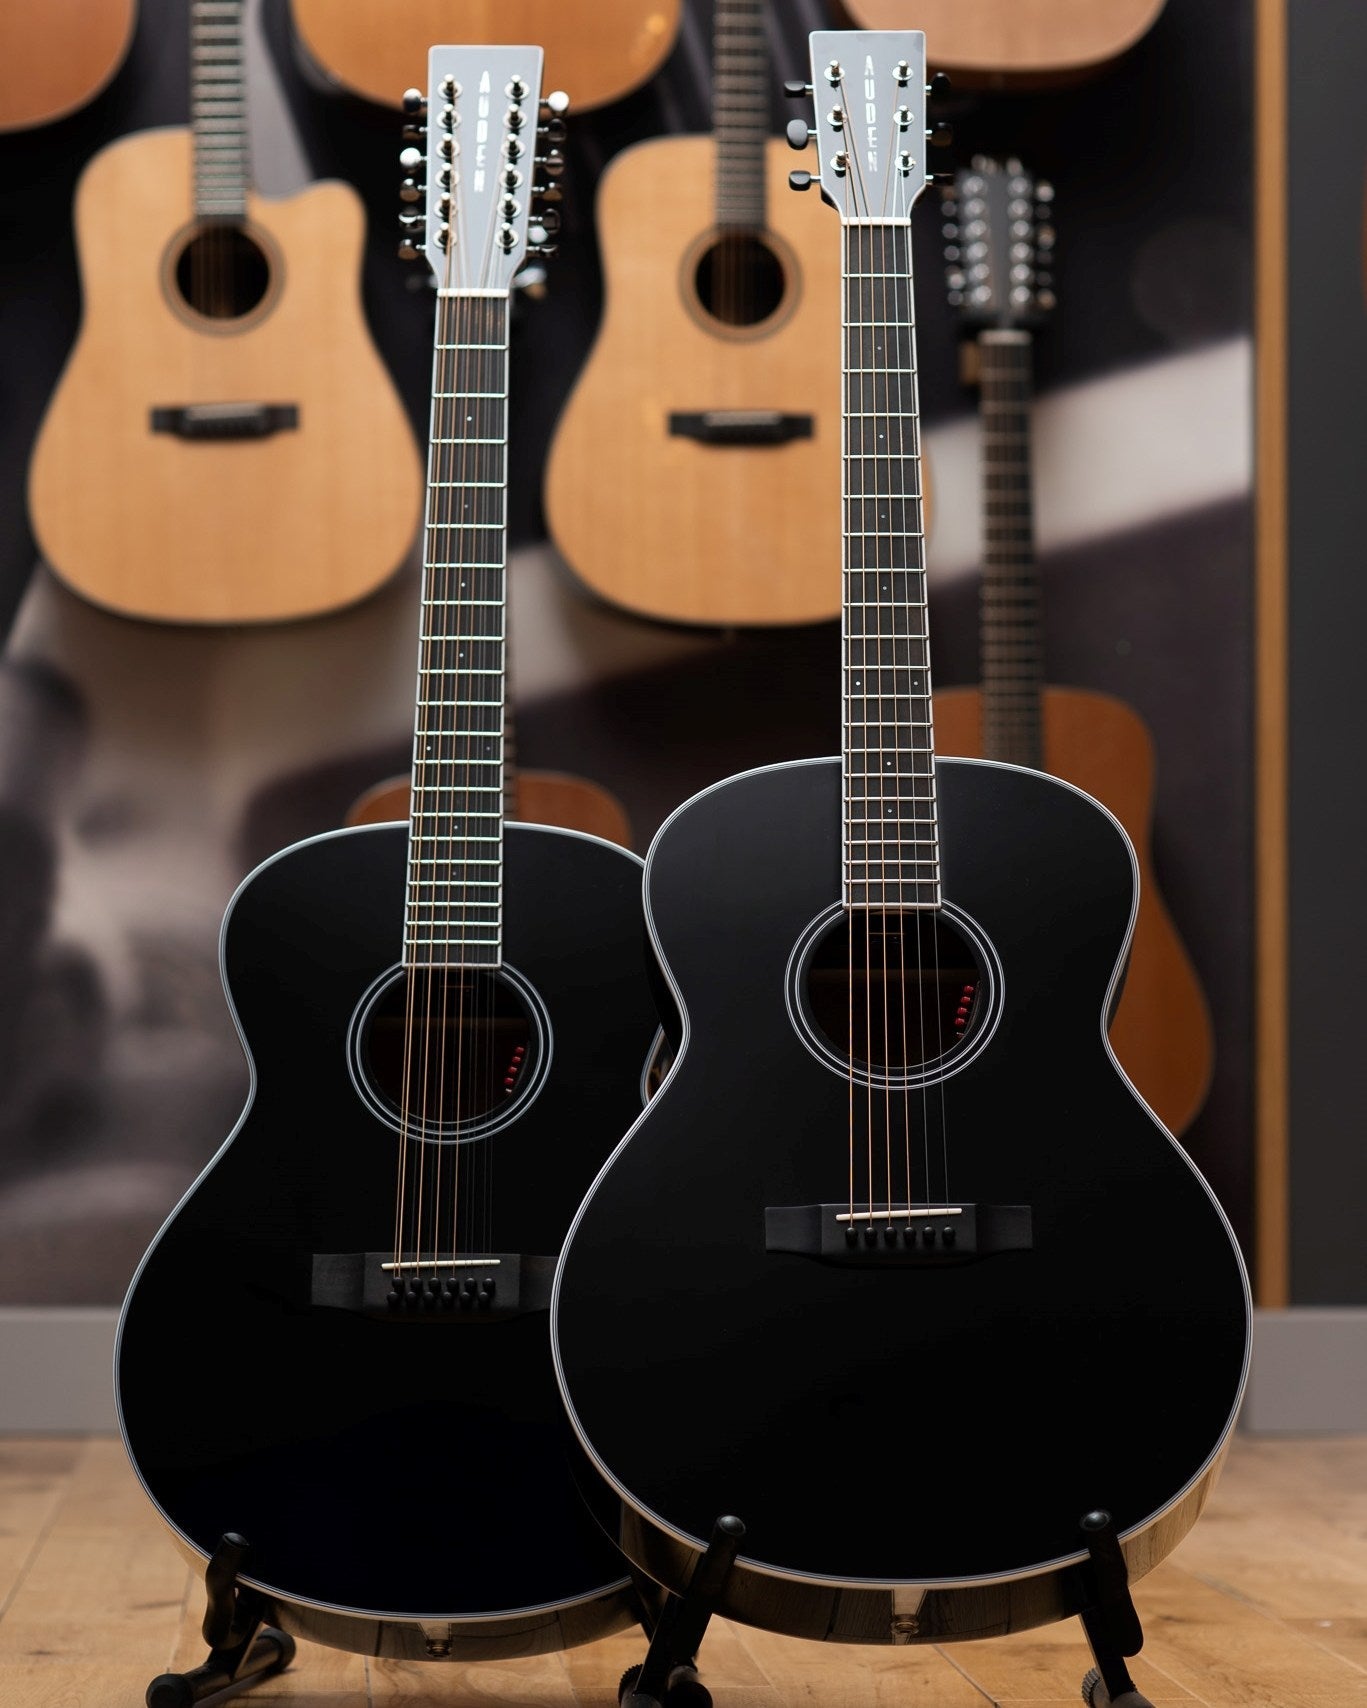 Auden Austin Black Series Spruce Mahogany Full Body  Electro Acoustic Guitar, Electro Acoustic Guitar for sale at Richards Guitars.